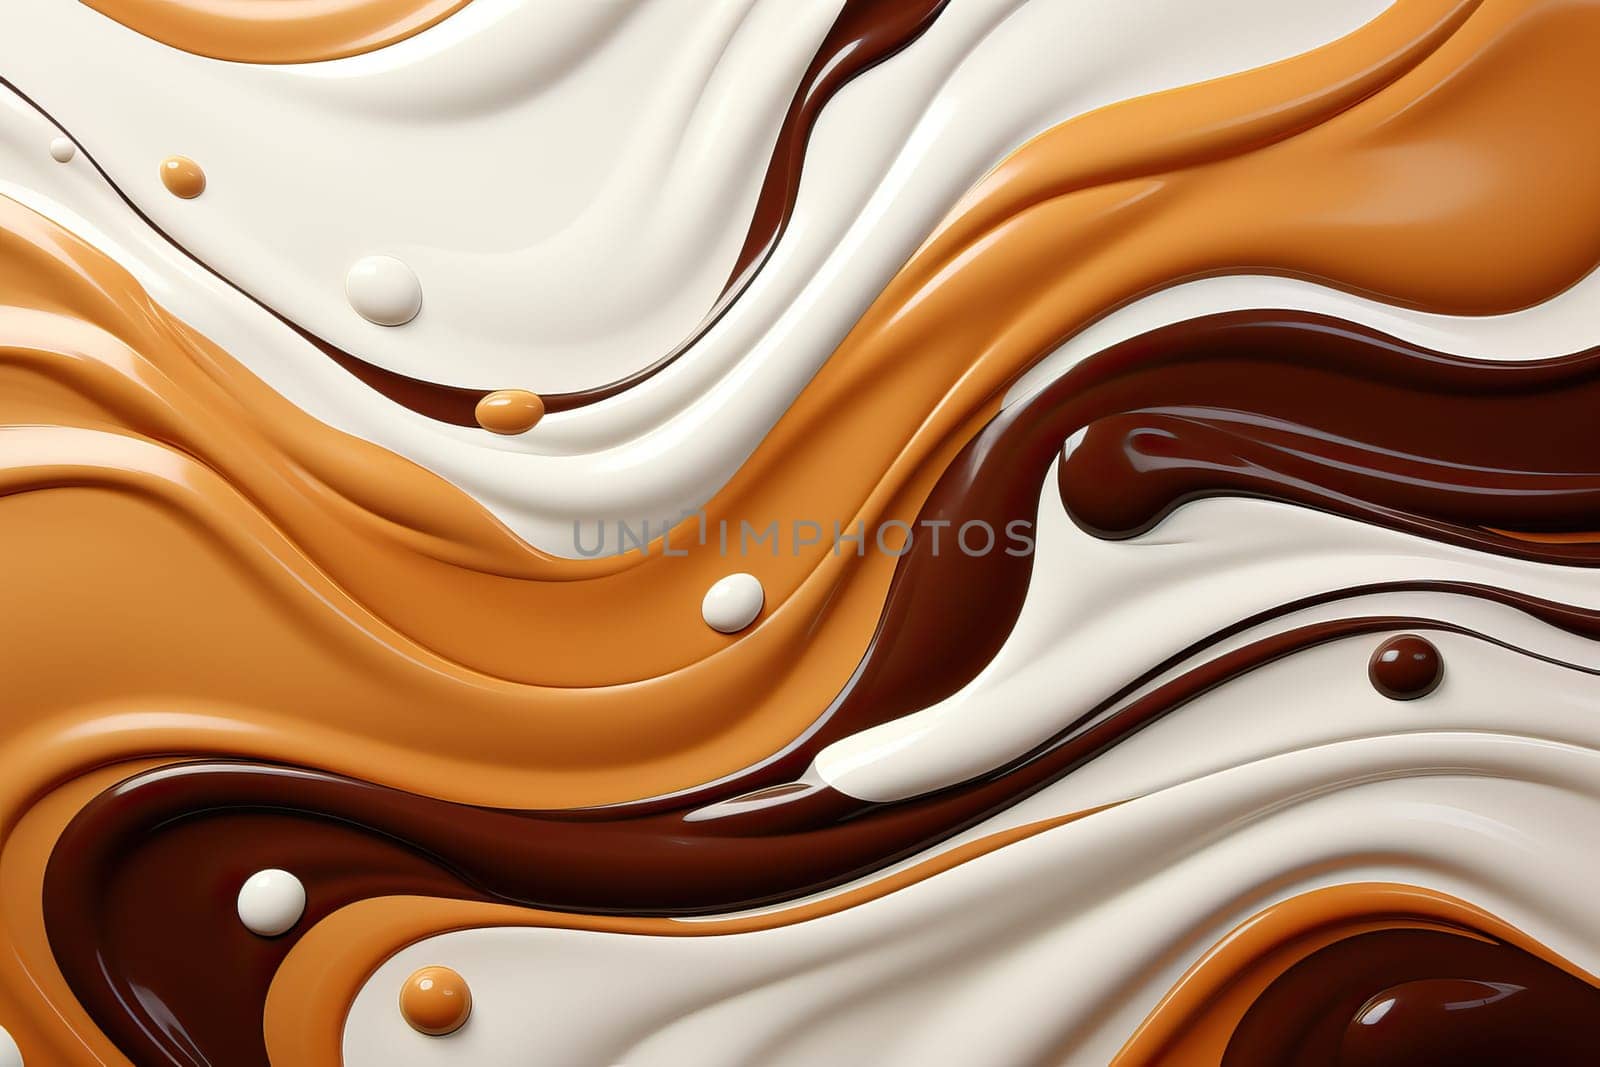 Texture from patterns of melted chocolate of different flavors, chocolate background.